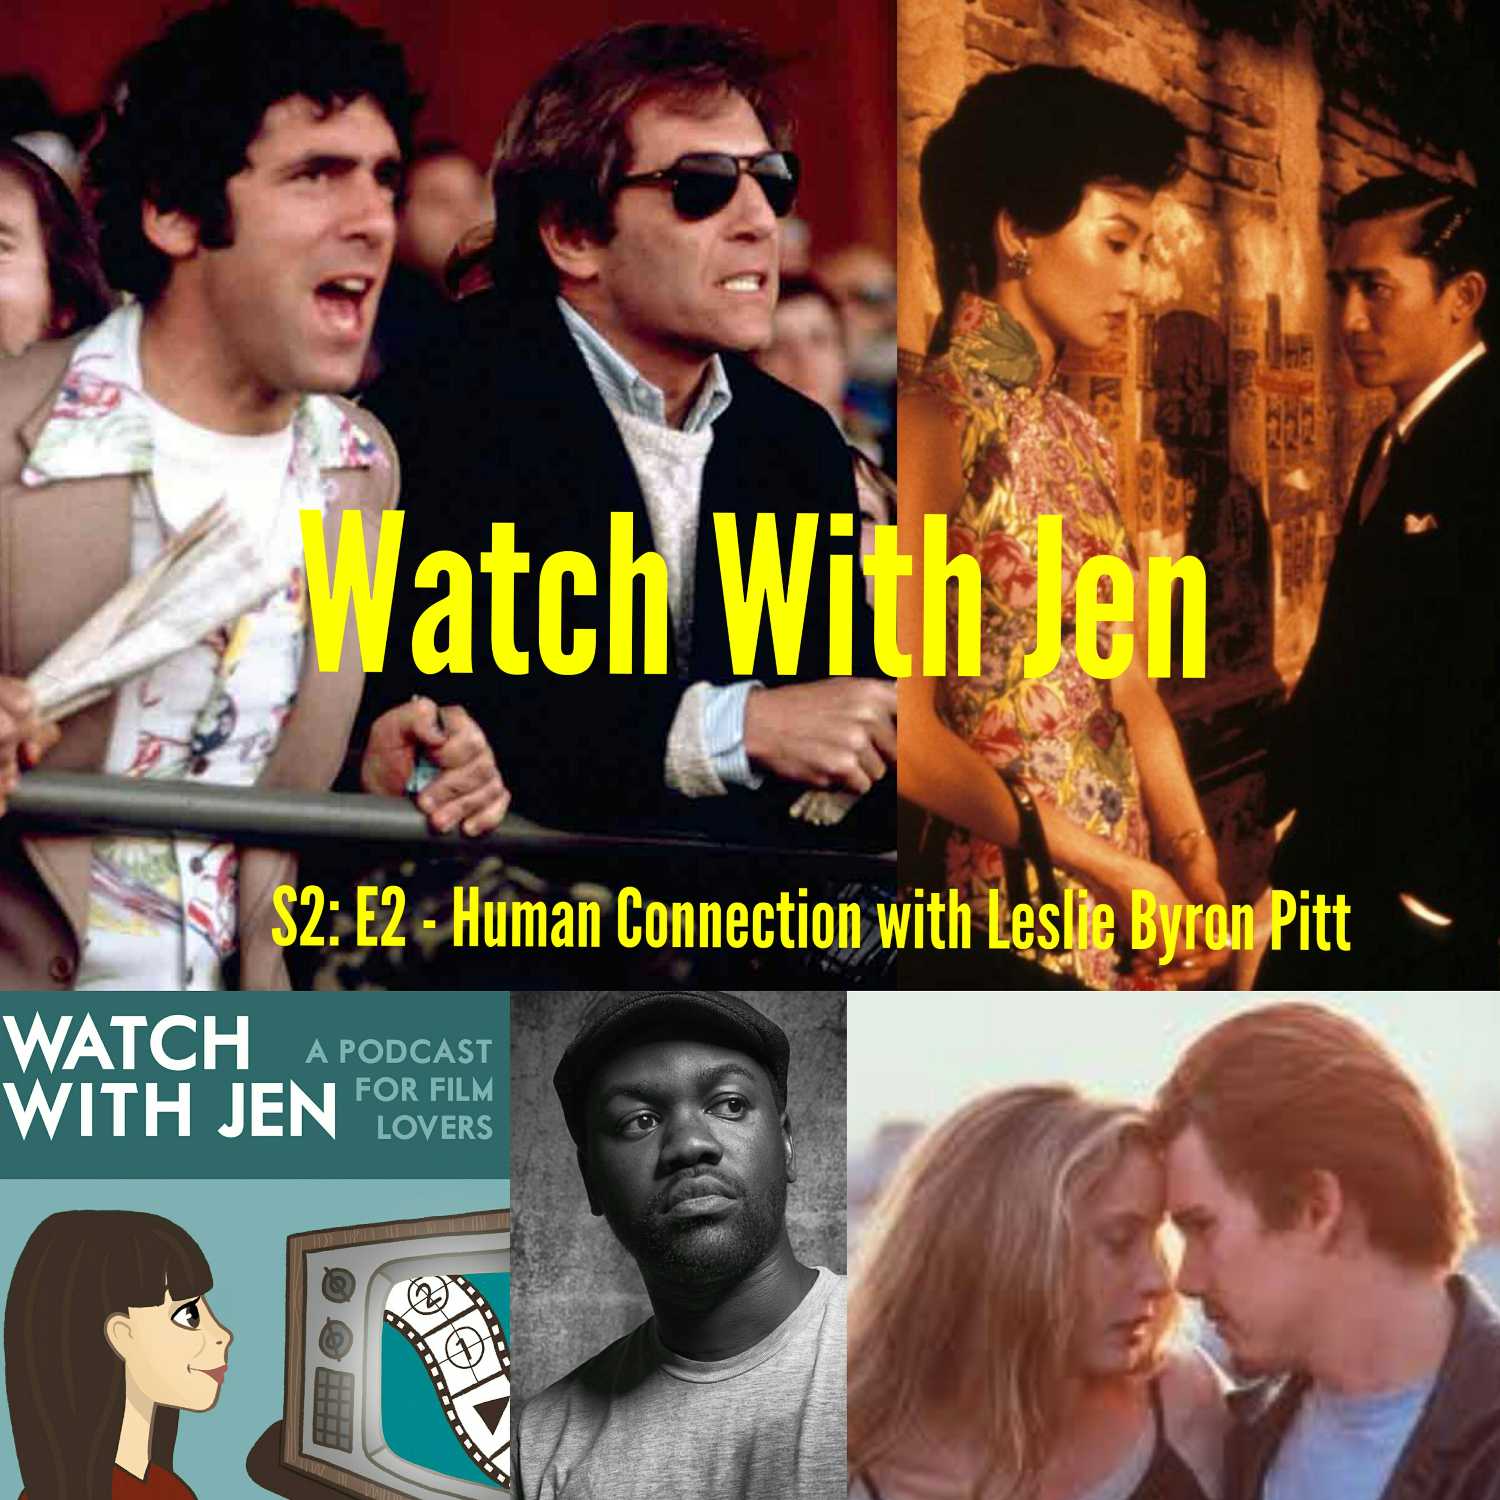 Watch With Jen - S2: E2 - Human Connection with Leslie Byron Pitt